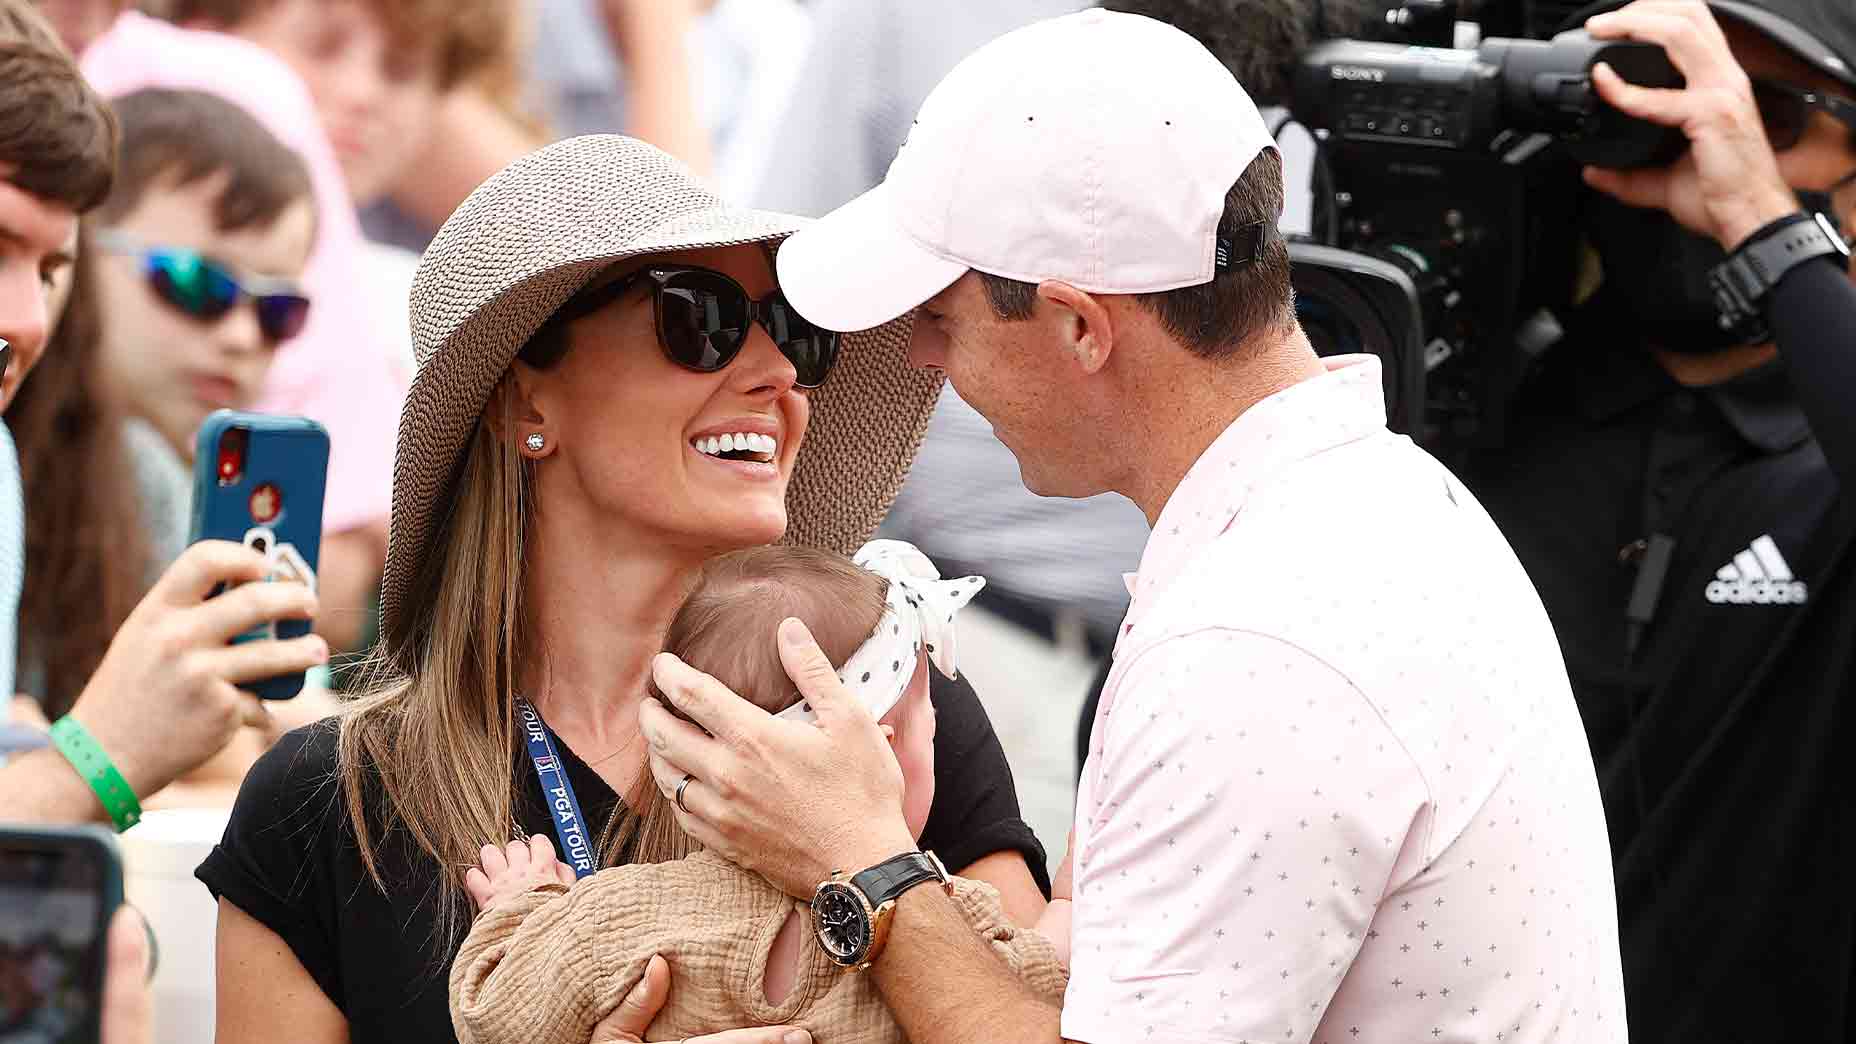 Rory McIlroy shares adorable moment with wife Erica, daughter after win